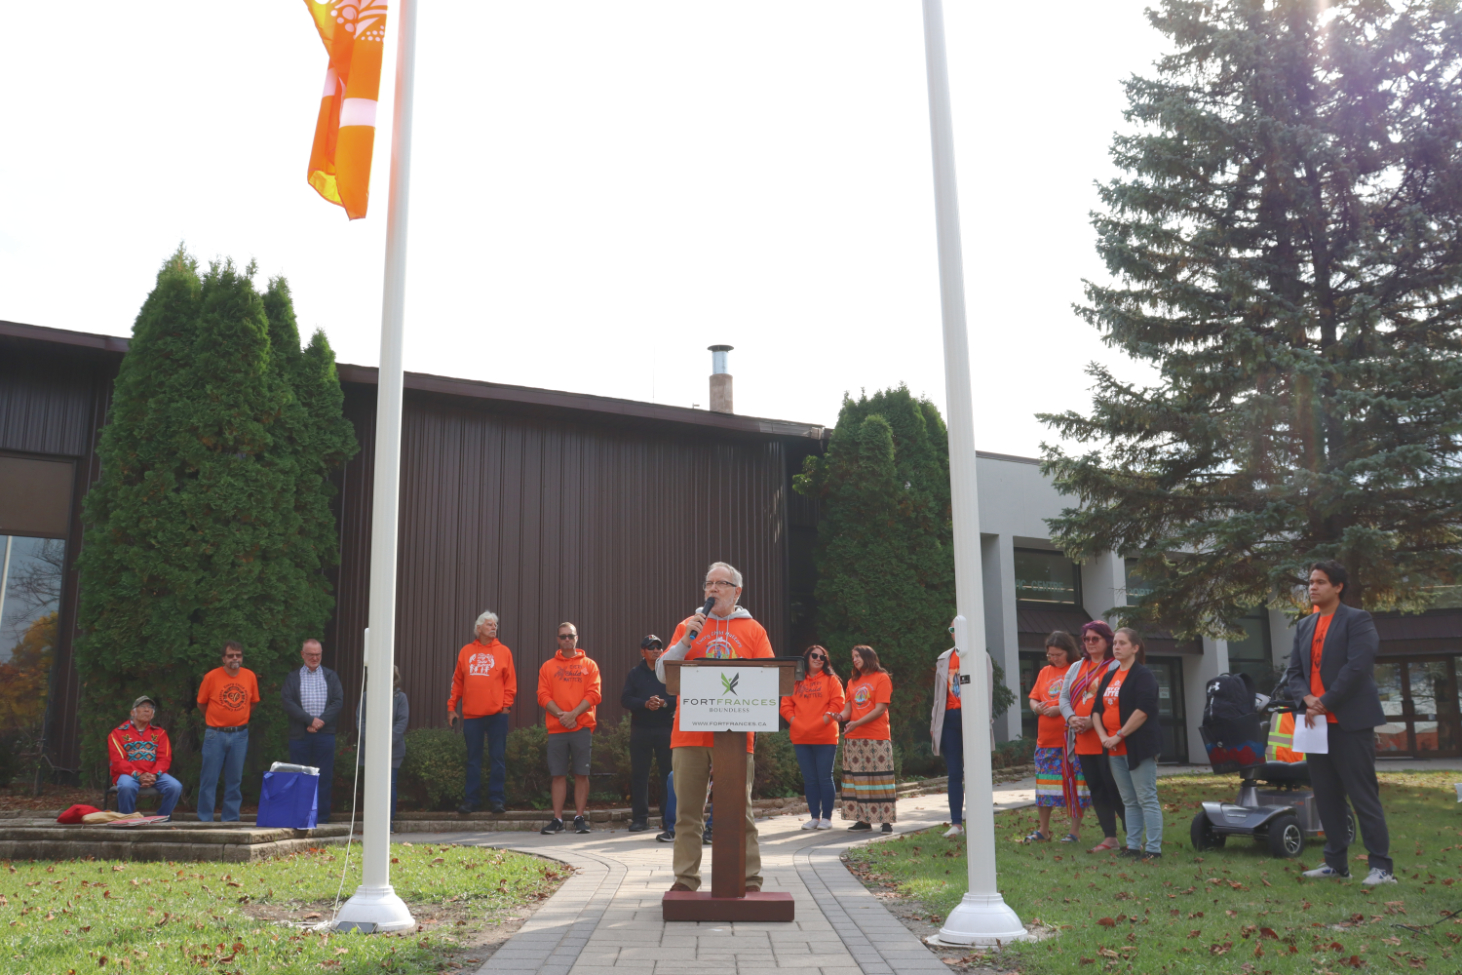 Survivor’s Flag raised at Fort Frances Civic Centre in a historic first